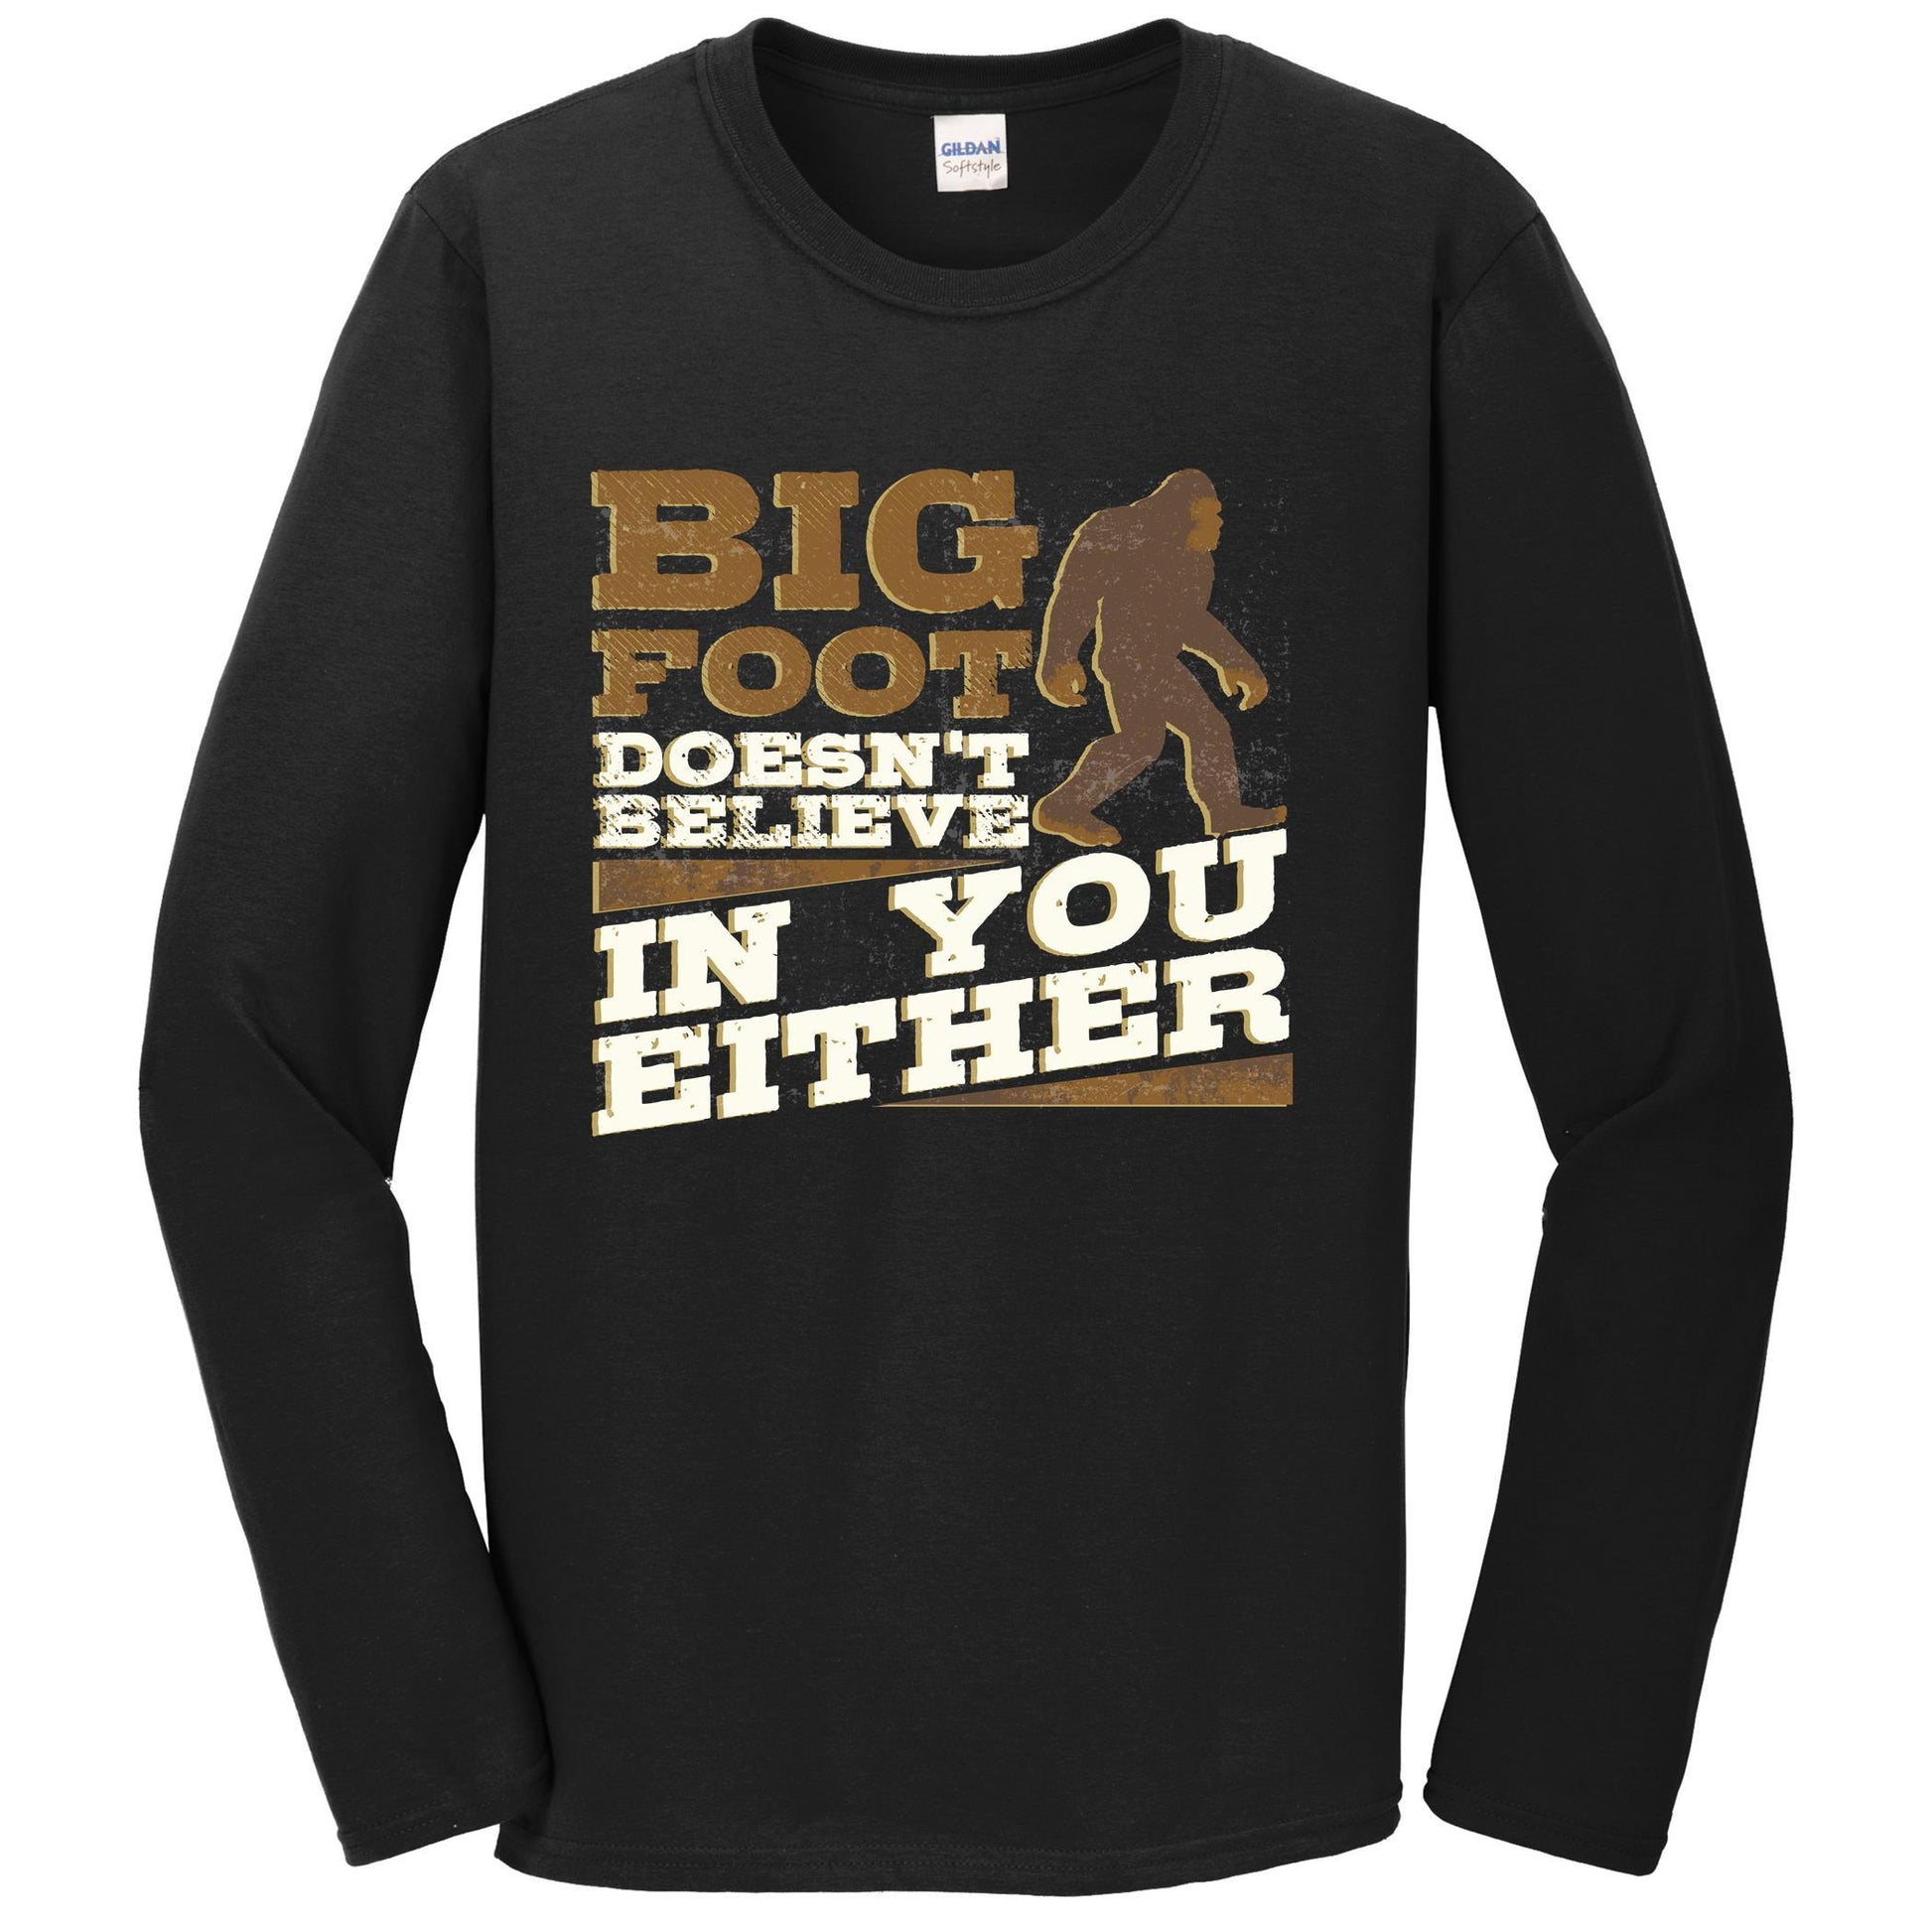 Bigfoot Doesn't Believe In You Either Funny Sasquatch Long Sleeve T-Shirt